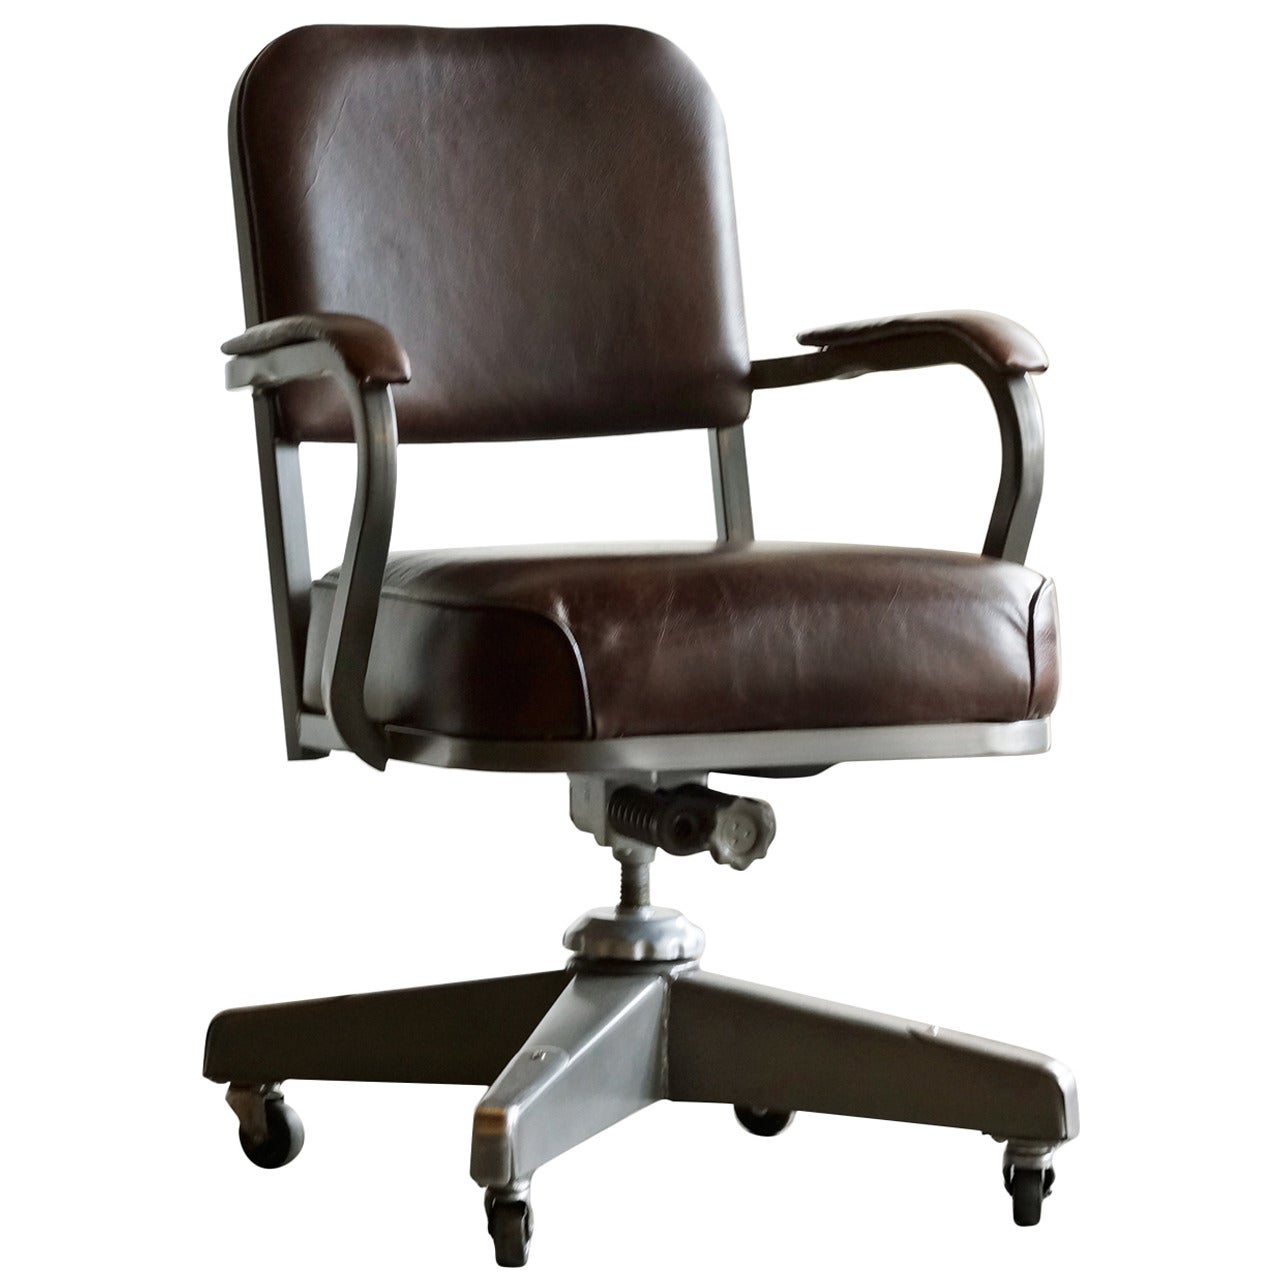 1960s Solid Back Steno Chair by McDowell Craig, Refinished